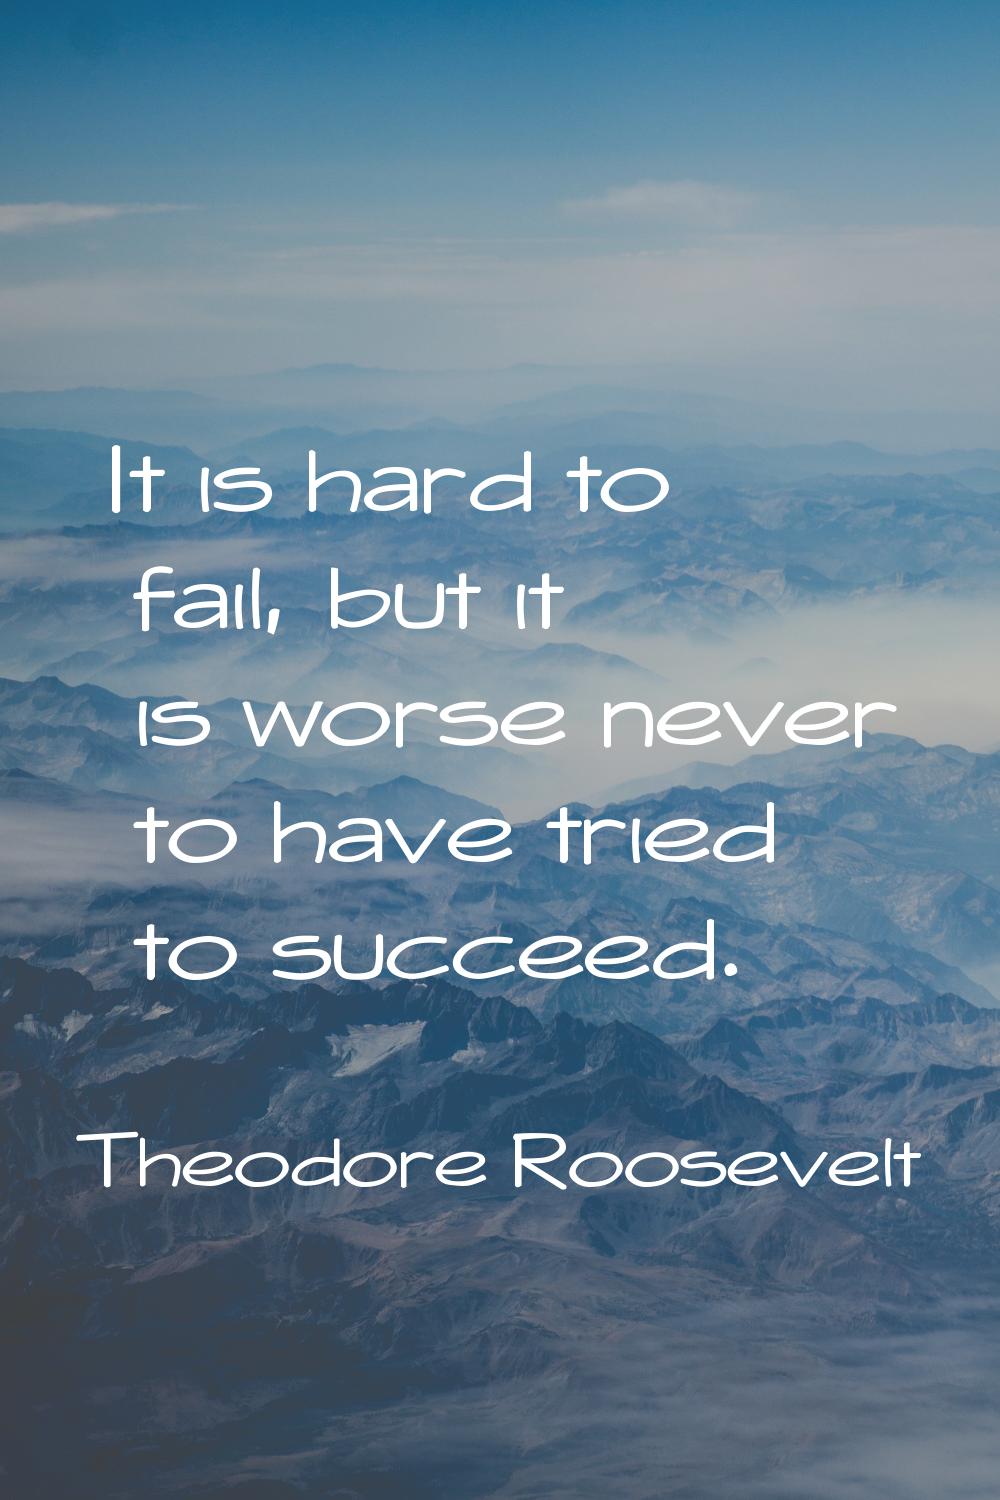 It is hard to fail, but it is worse never to have tried to succeed.